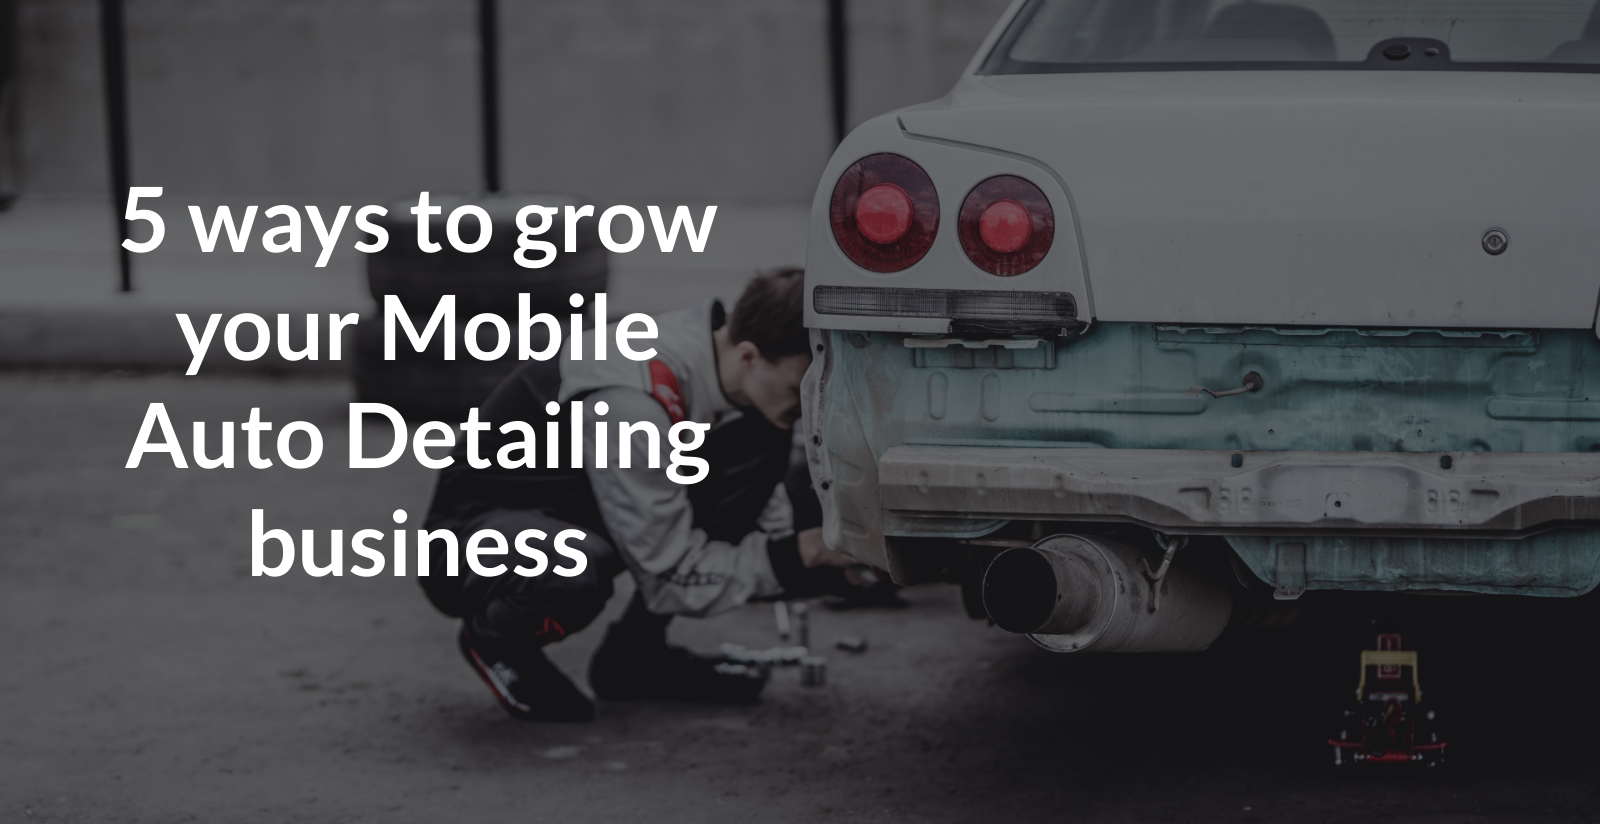 How to market and advertise your mobile auto detailing business